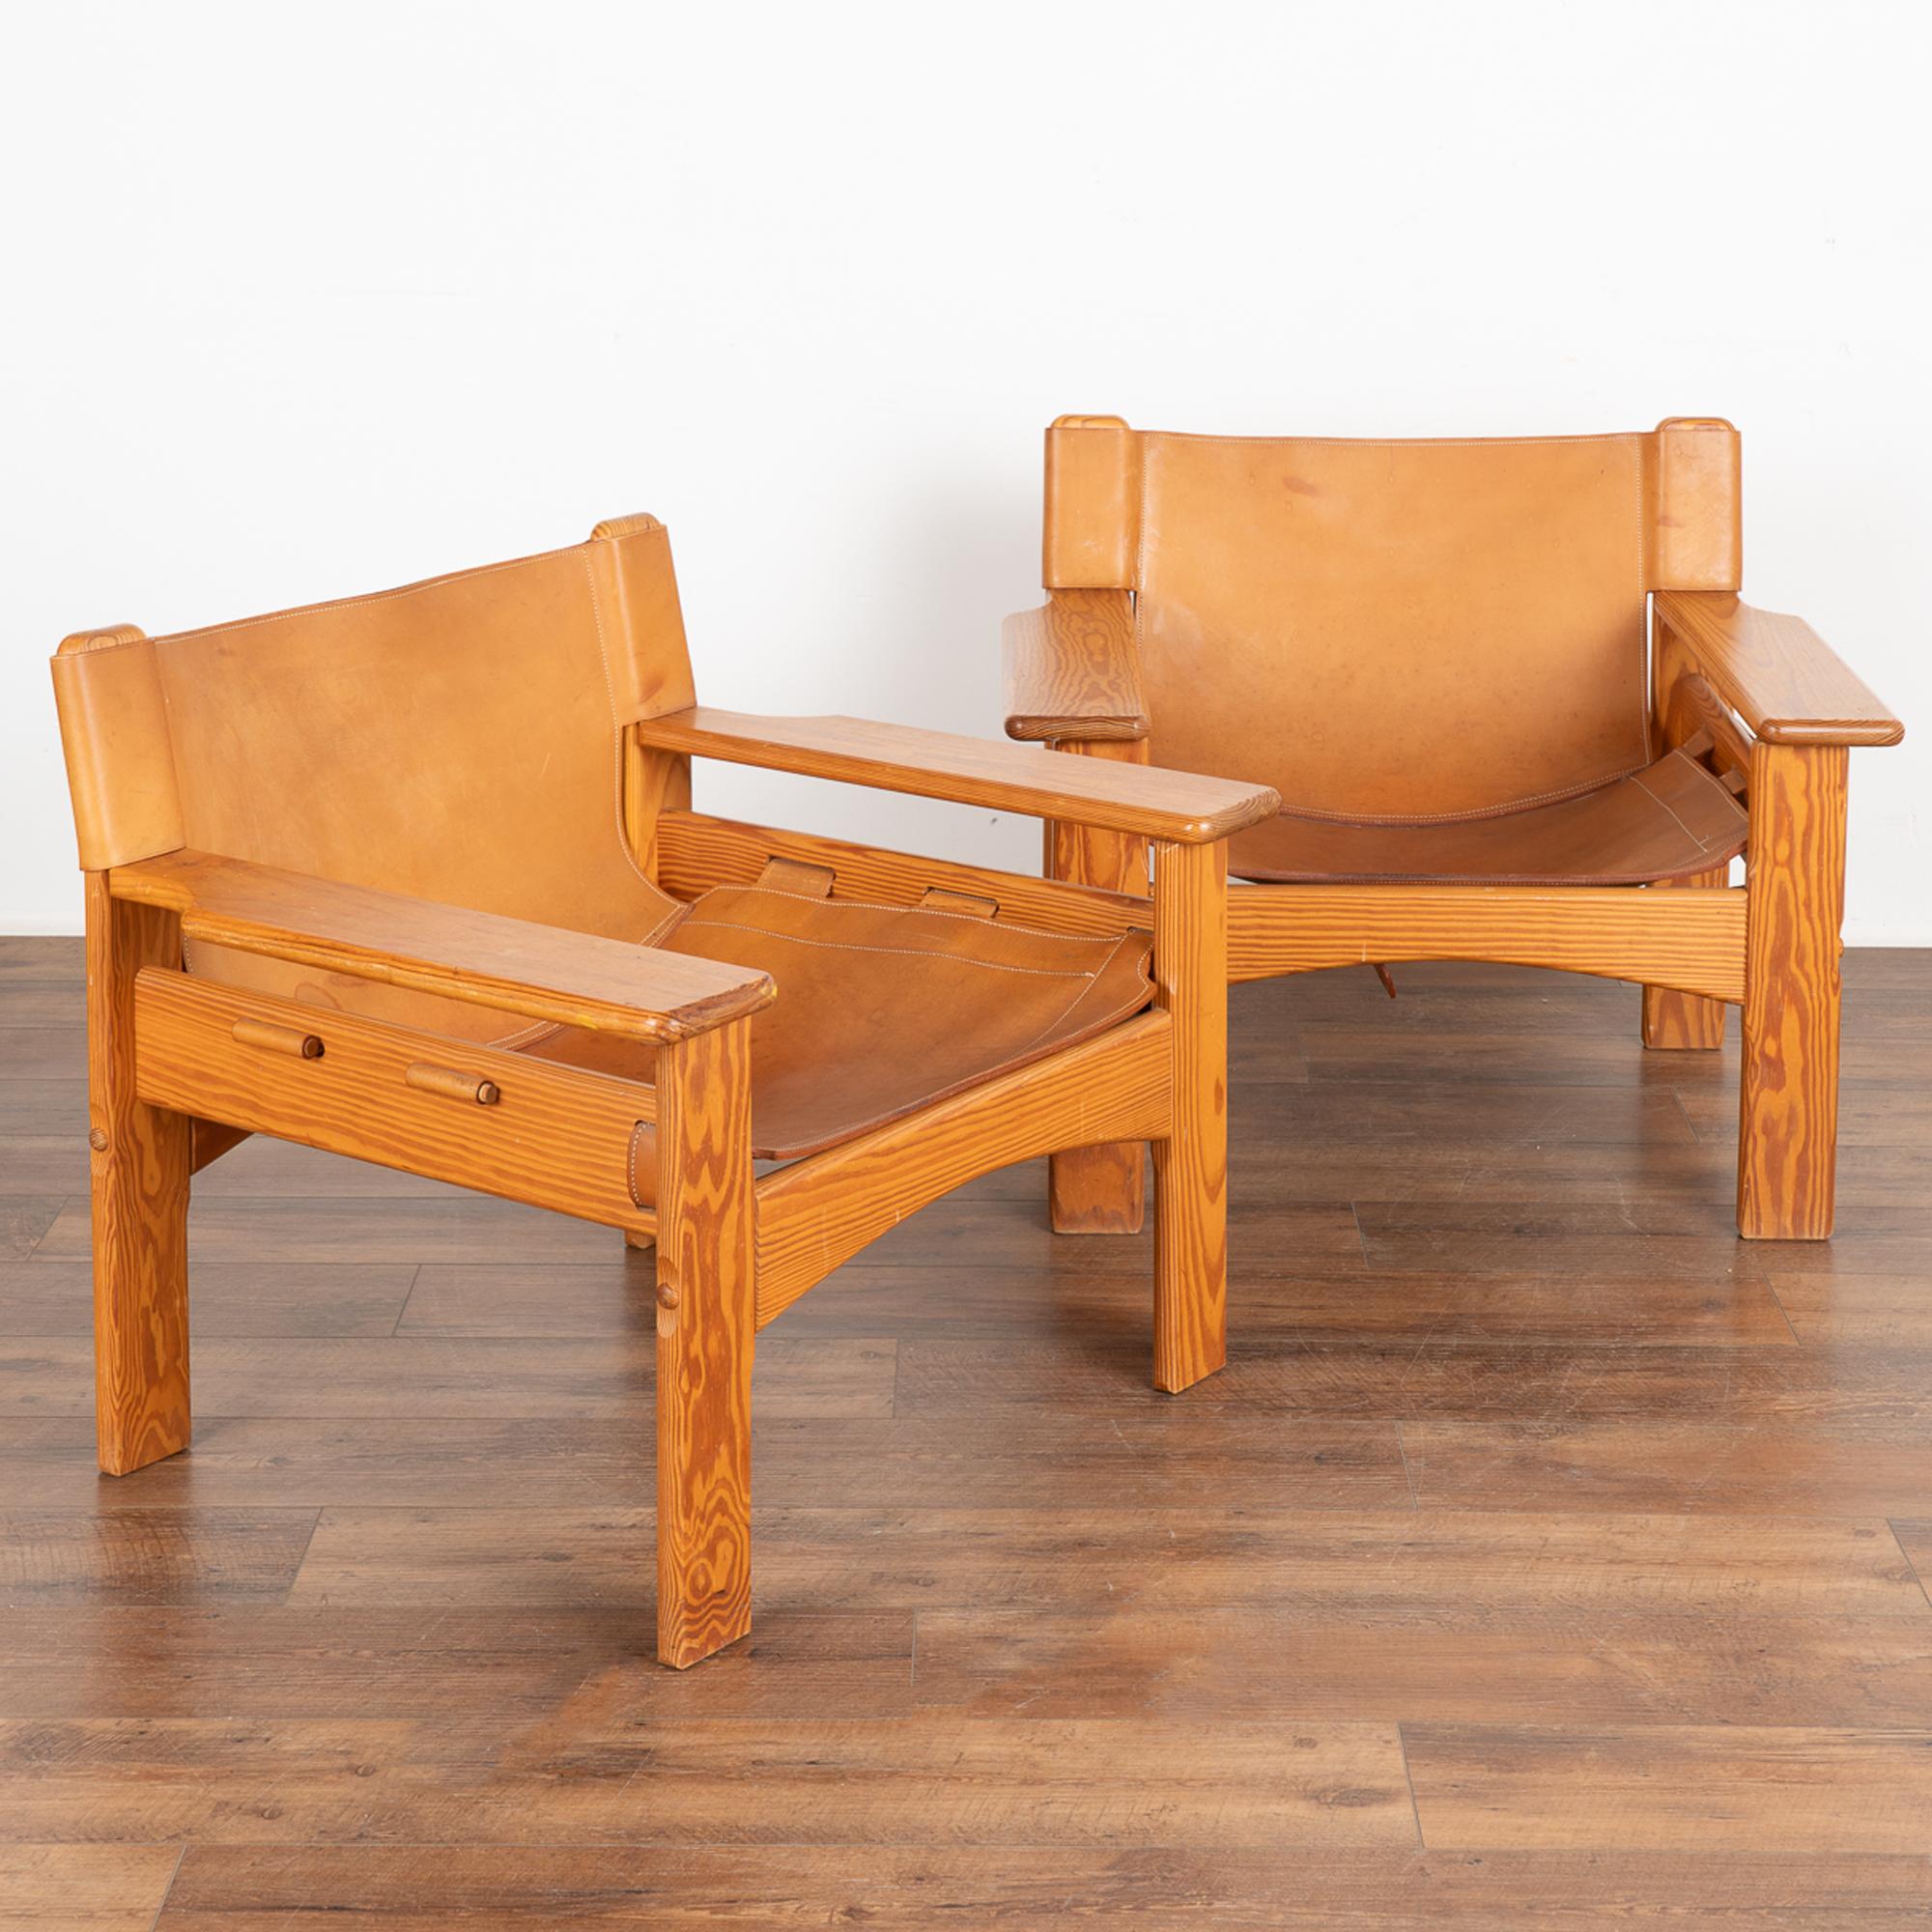 Pair, Mid Century Leather Sling Lounge Chairs, Karin Mobring Sweden 1970's
A pair of mid-century Scandinavian pine lounge chairs with full grain stitched cognac leather sling seat and back; Karin Mobring for Ikea Sweden 1970s.
Sold in used vintage